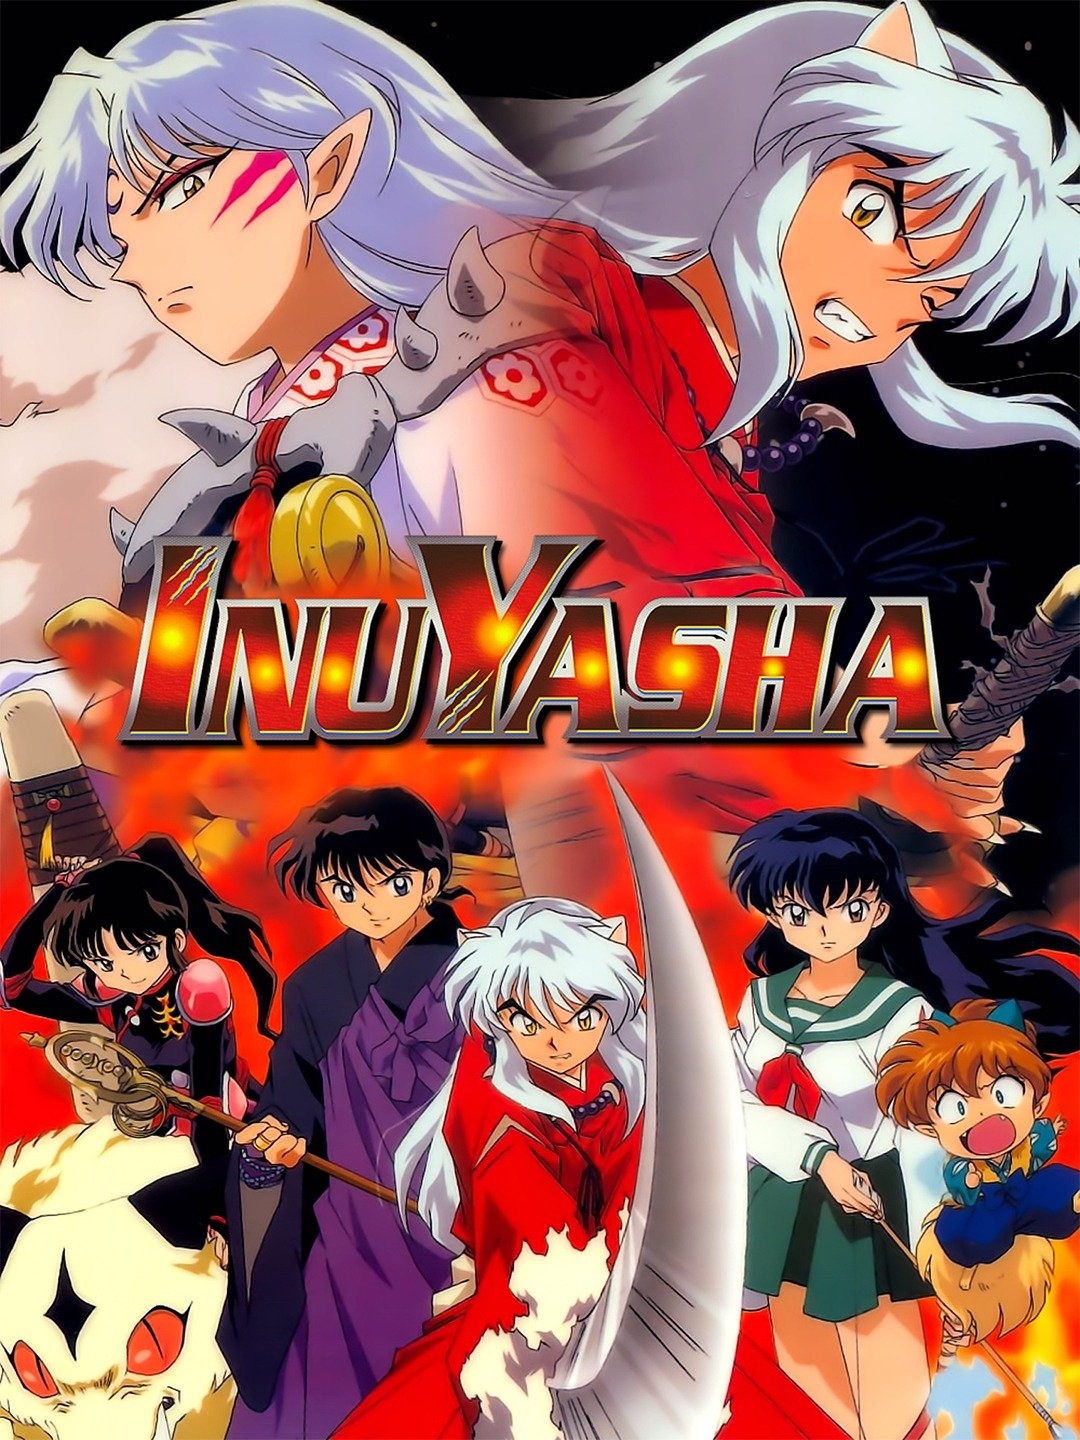 Inuyasha: The Final Act - Prime Video